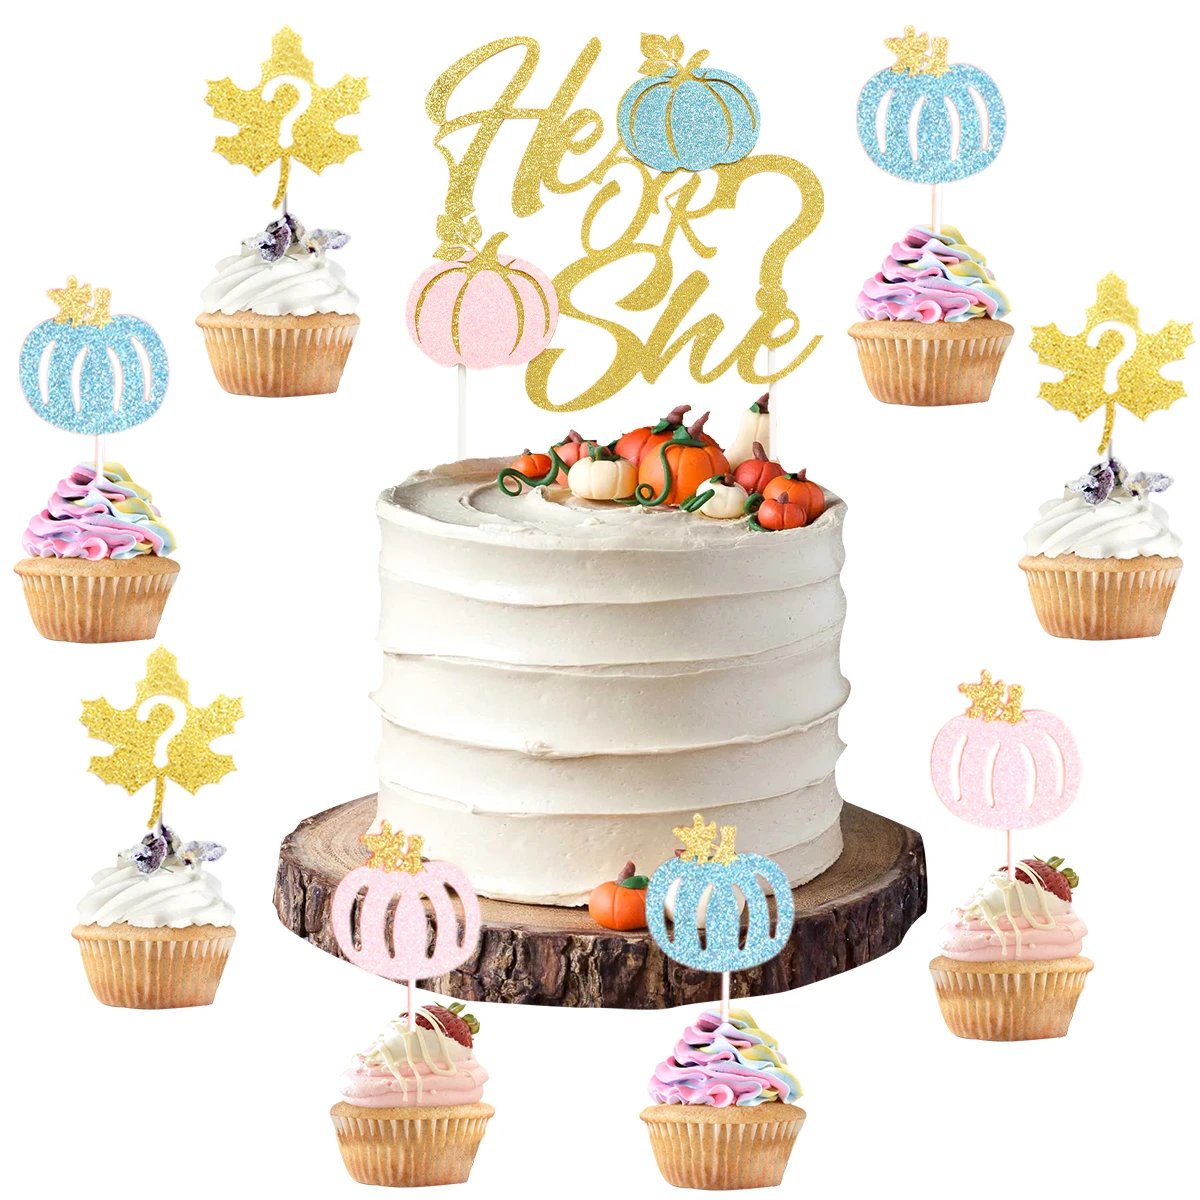 

JOYMEMO Little Pumpkin Gender Reveal Cake Decorations He or She Cake Cupcake Toppers for Boy or Girl Gender Reveal Party Decor